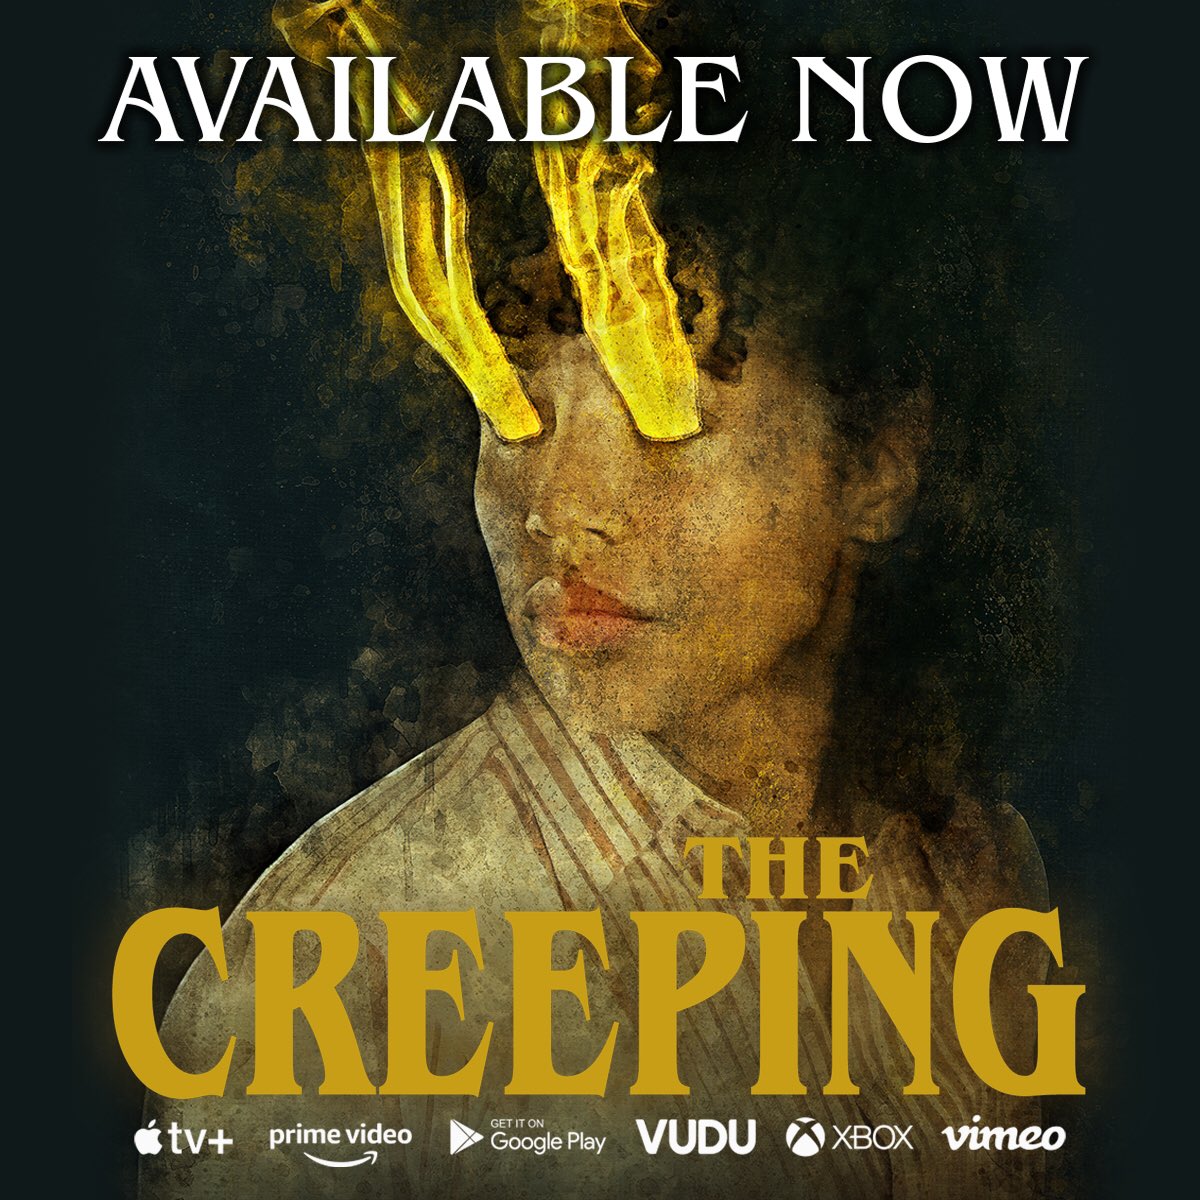 Jamie Hooper’s #TheCreeping is out today on @AppleTV, @PrimeVideo and @VuduFans from @darkskyfilms. It was a blast working on this, and a delight to see it now let free, brimming with chills! Check it out:
apple.co/3ku1vd2
amazon.com/dp/B0B6FMCZ9Y
vudu.com/content/movies…